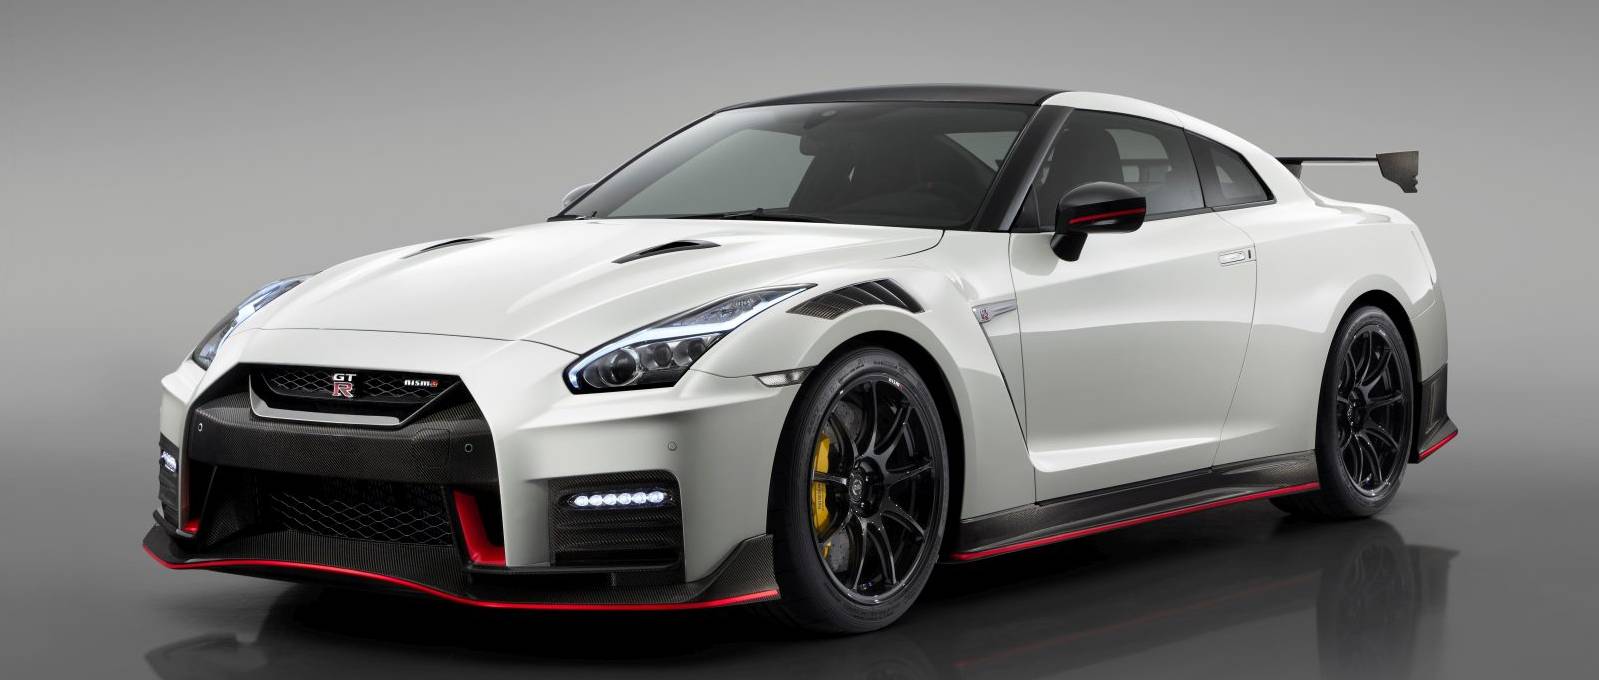 Nissan GT-R Nismo. Pension is canceled